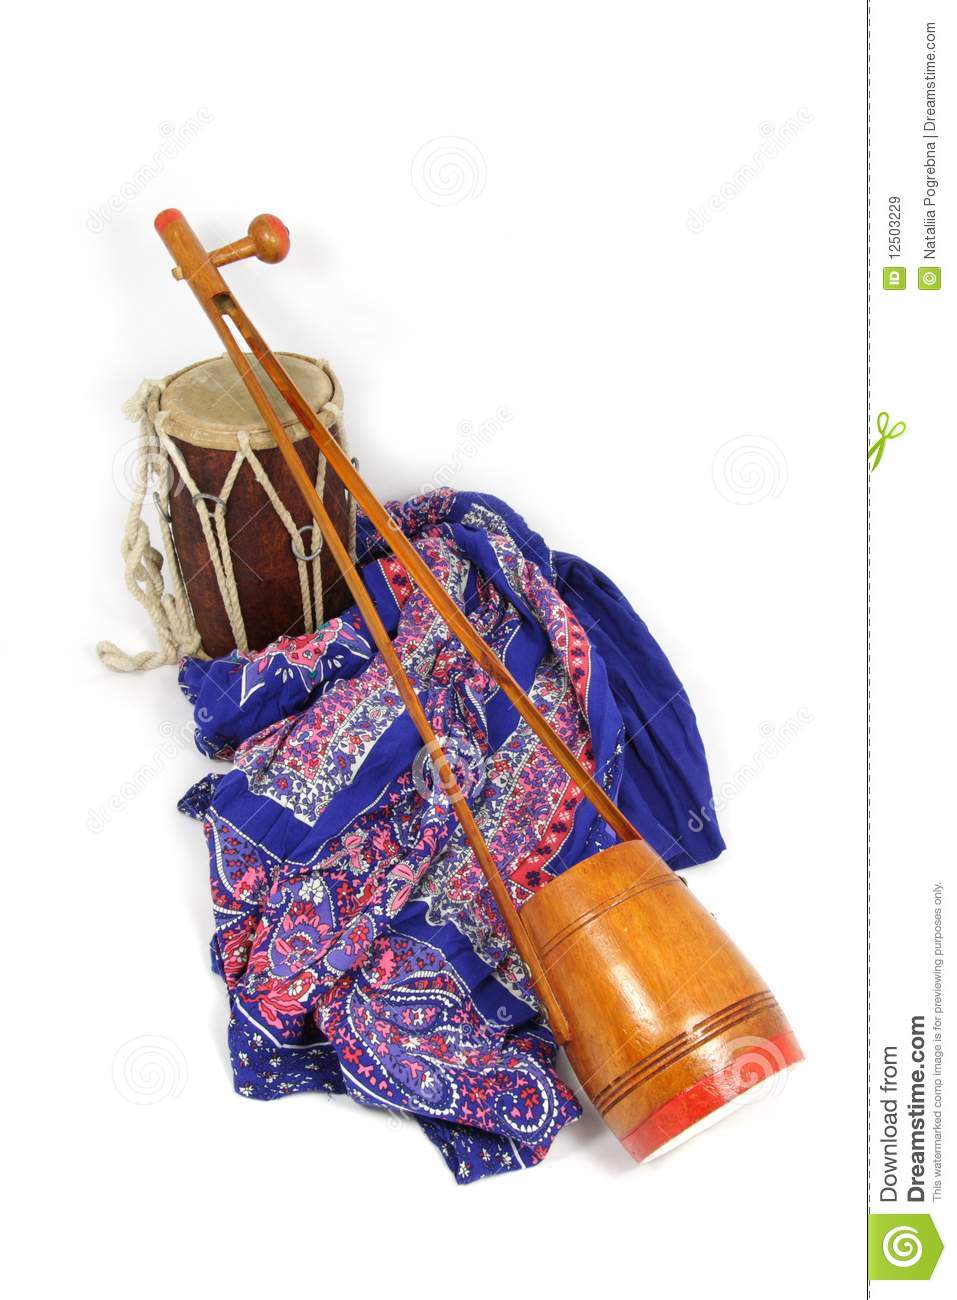 Indian Music Instruments Royalty Free Stock Images   Image  12503229